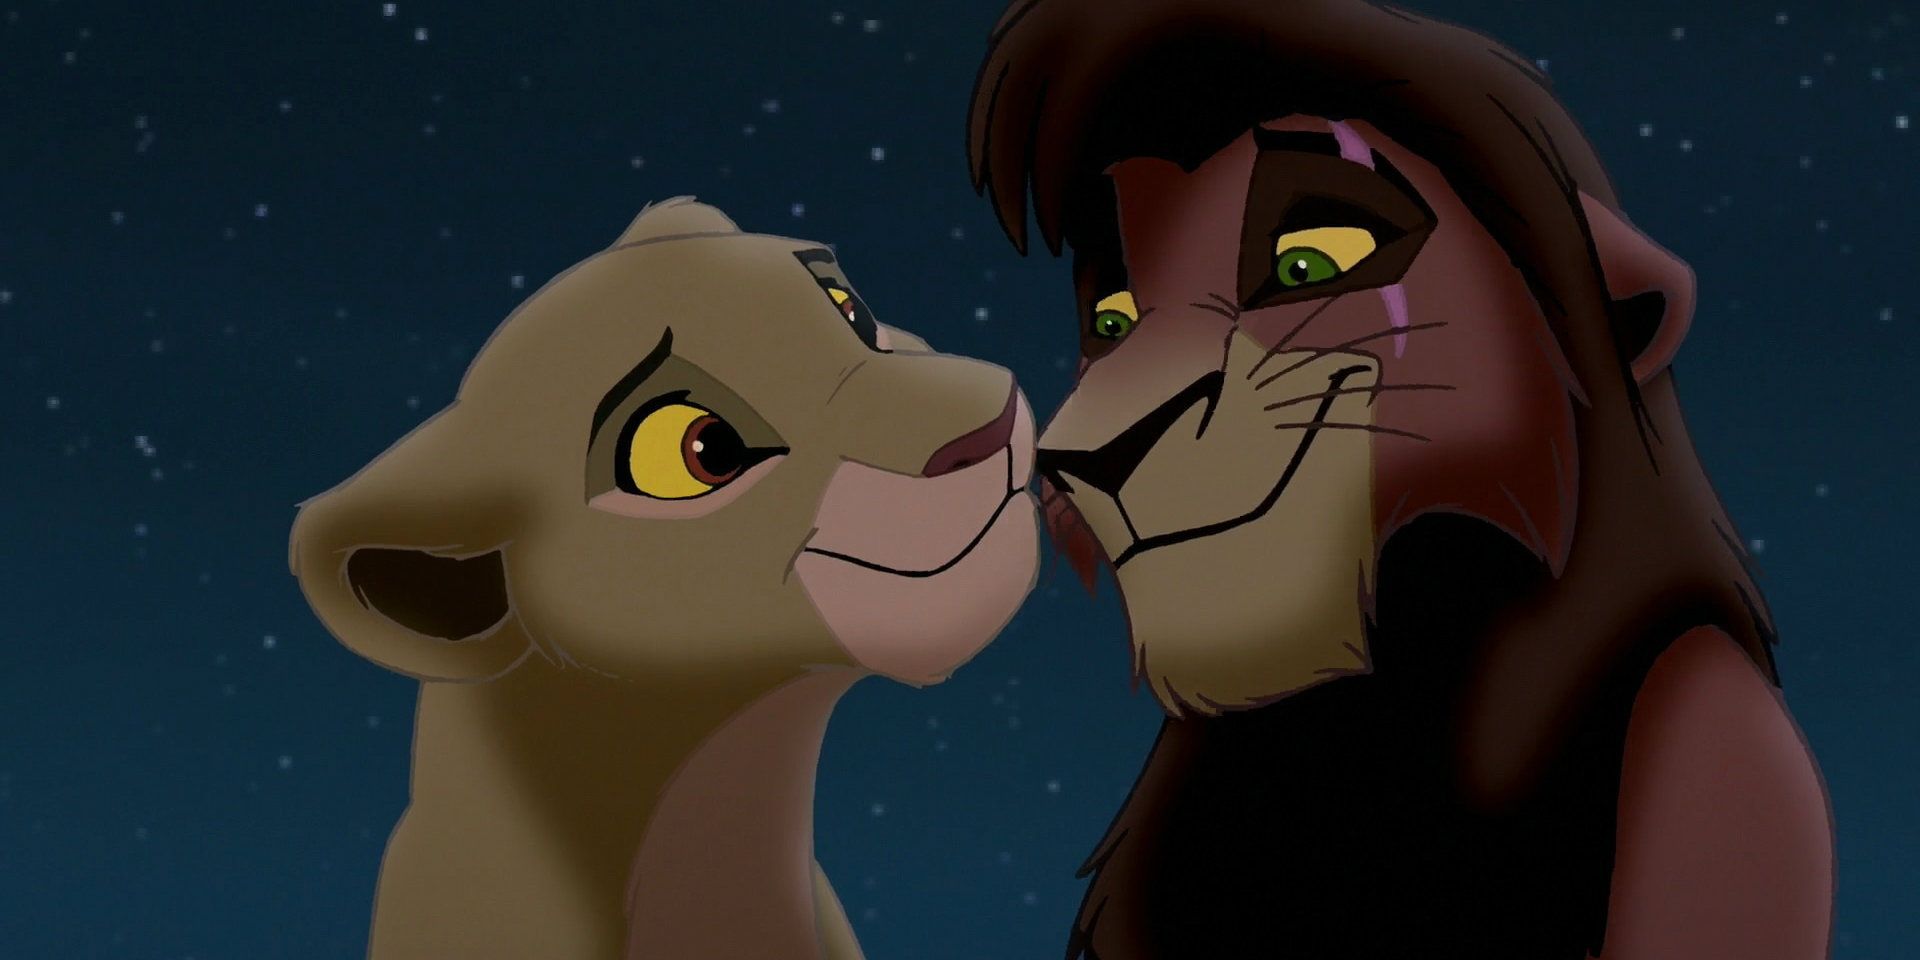 Kovu and Kiara looking adoringly at each other in The Lion King 2